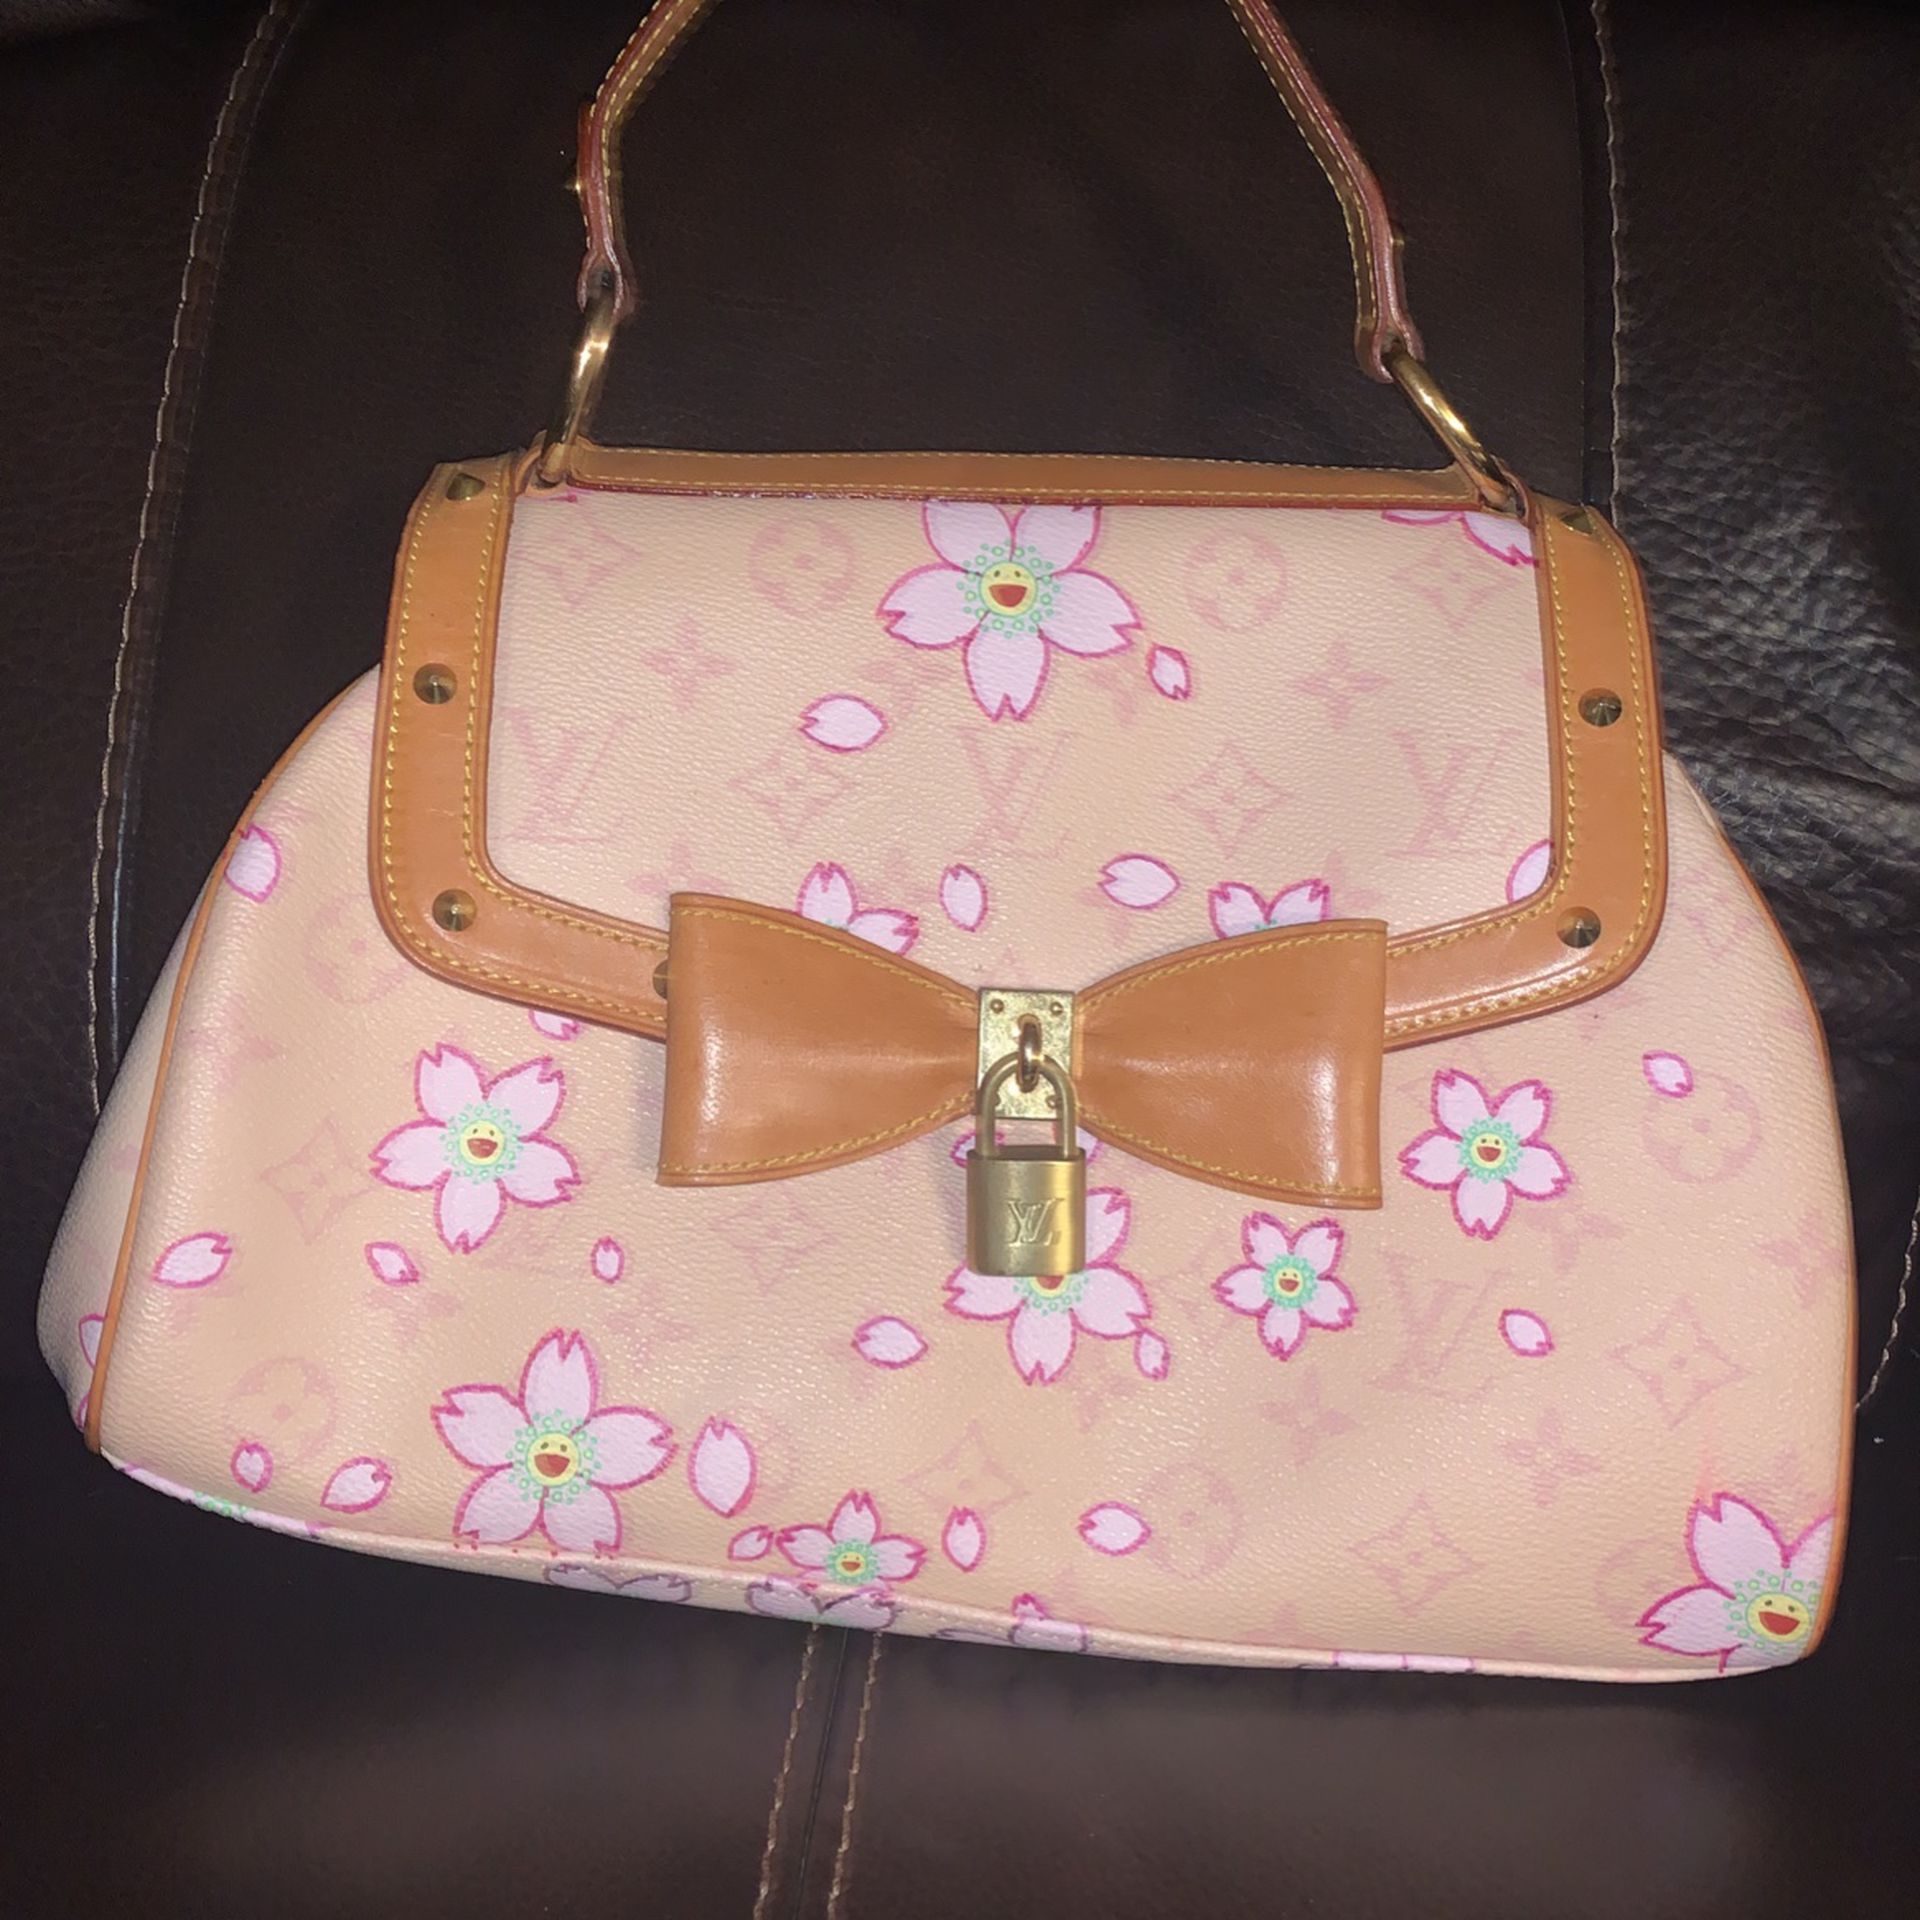 Authentic 2003 Limited Edition Louis Vuitton Cherry Blossom Retro Sac for  Sale in San Antonio, TX - OfferUp